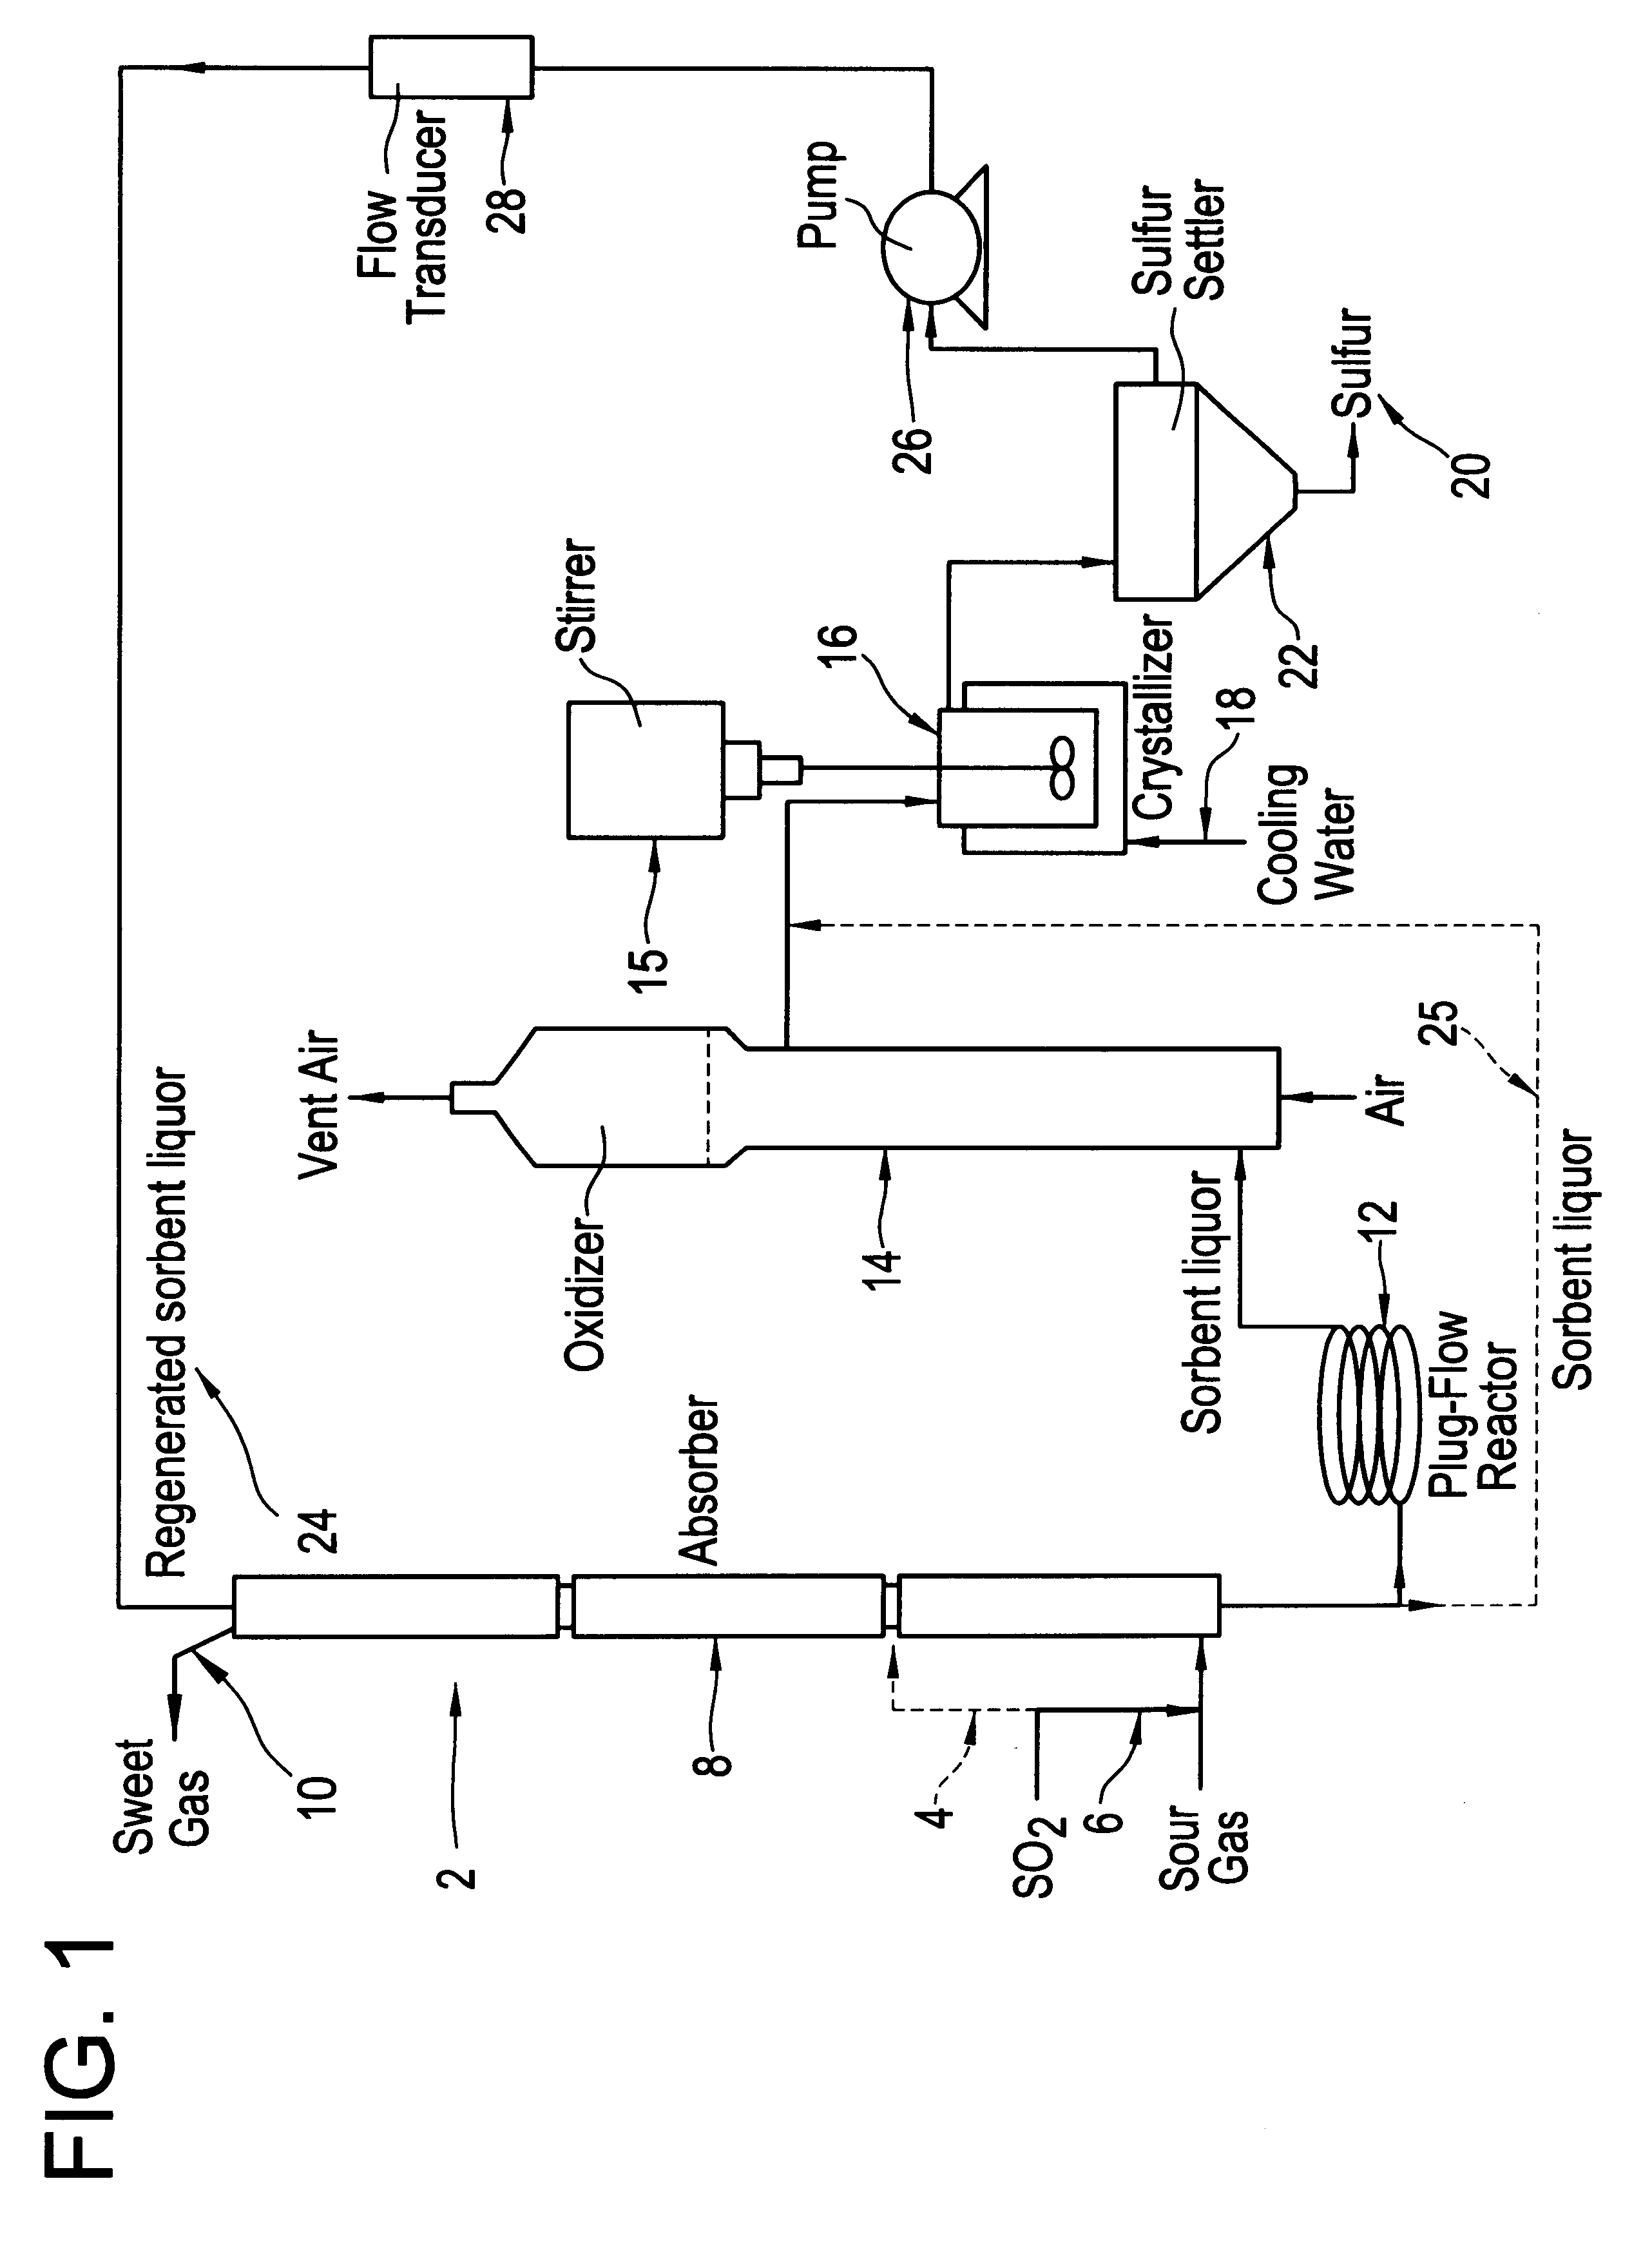 Process for removing hydrogen sulfide from gas streams which include or are supplemented with sulfur dioxide